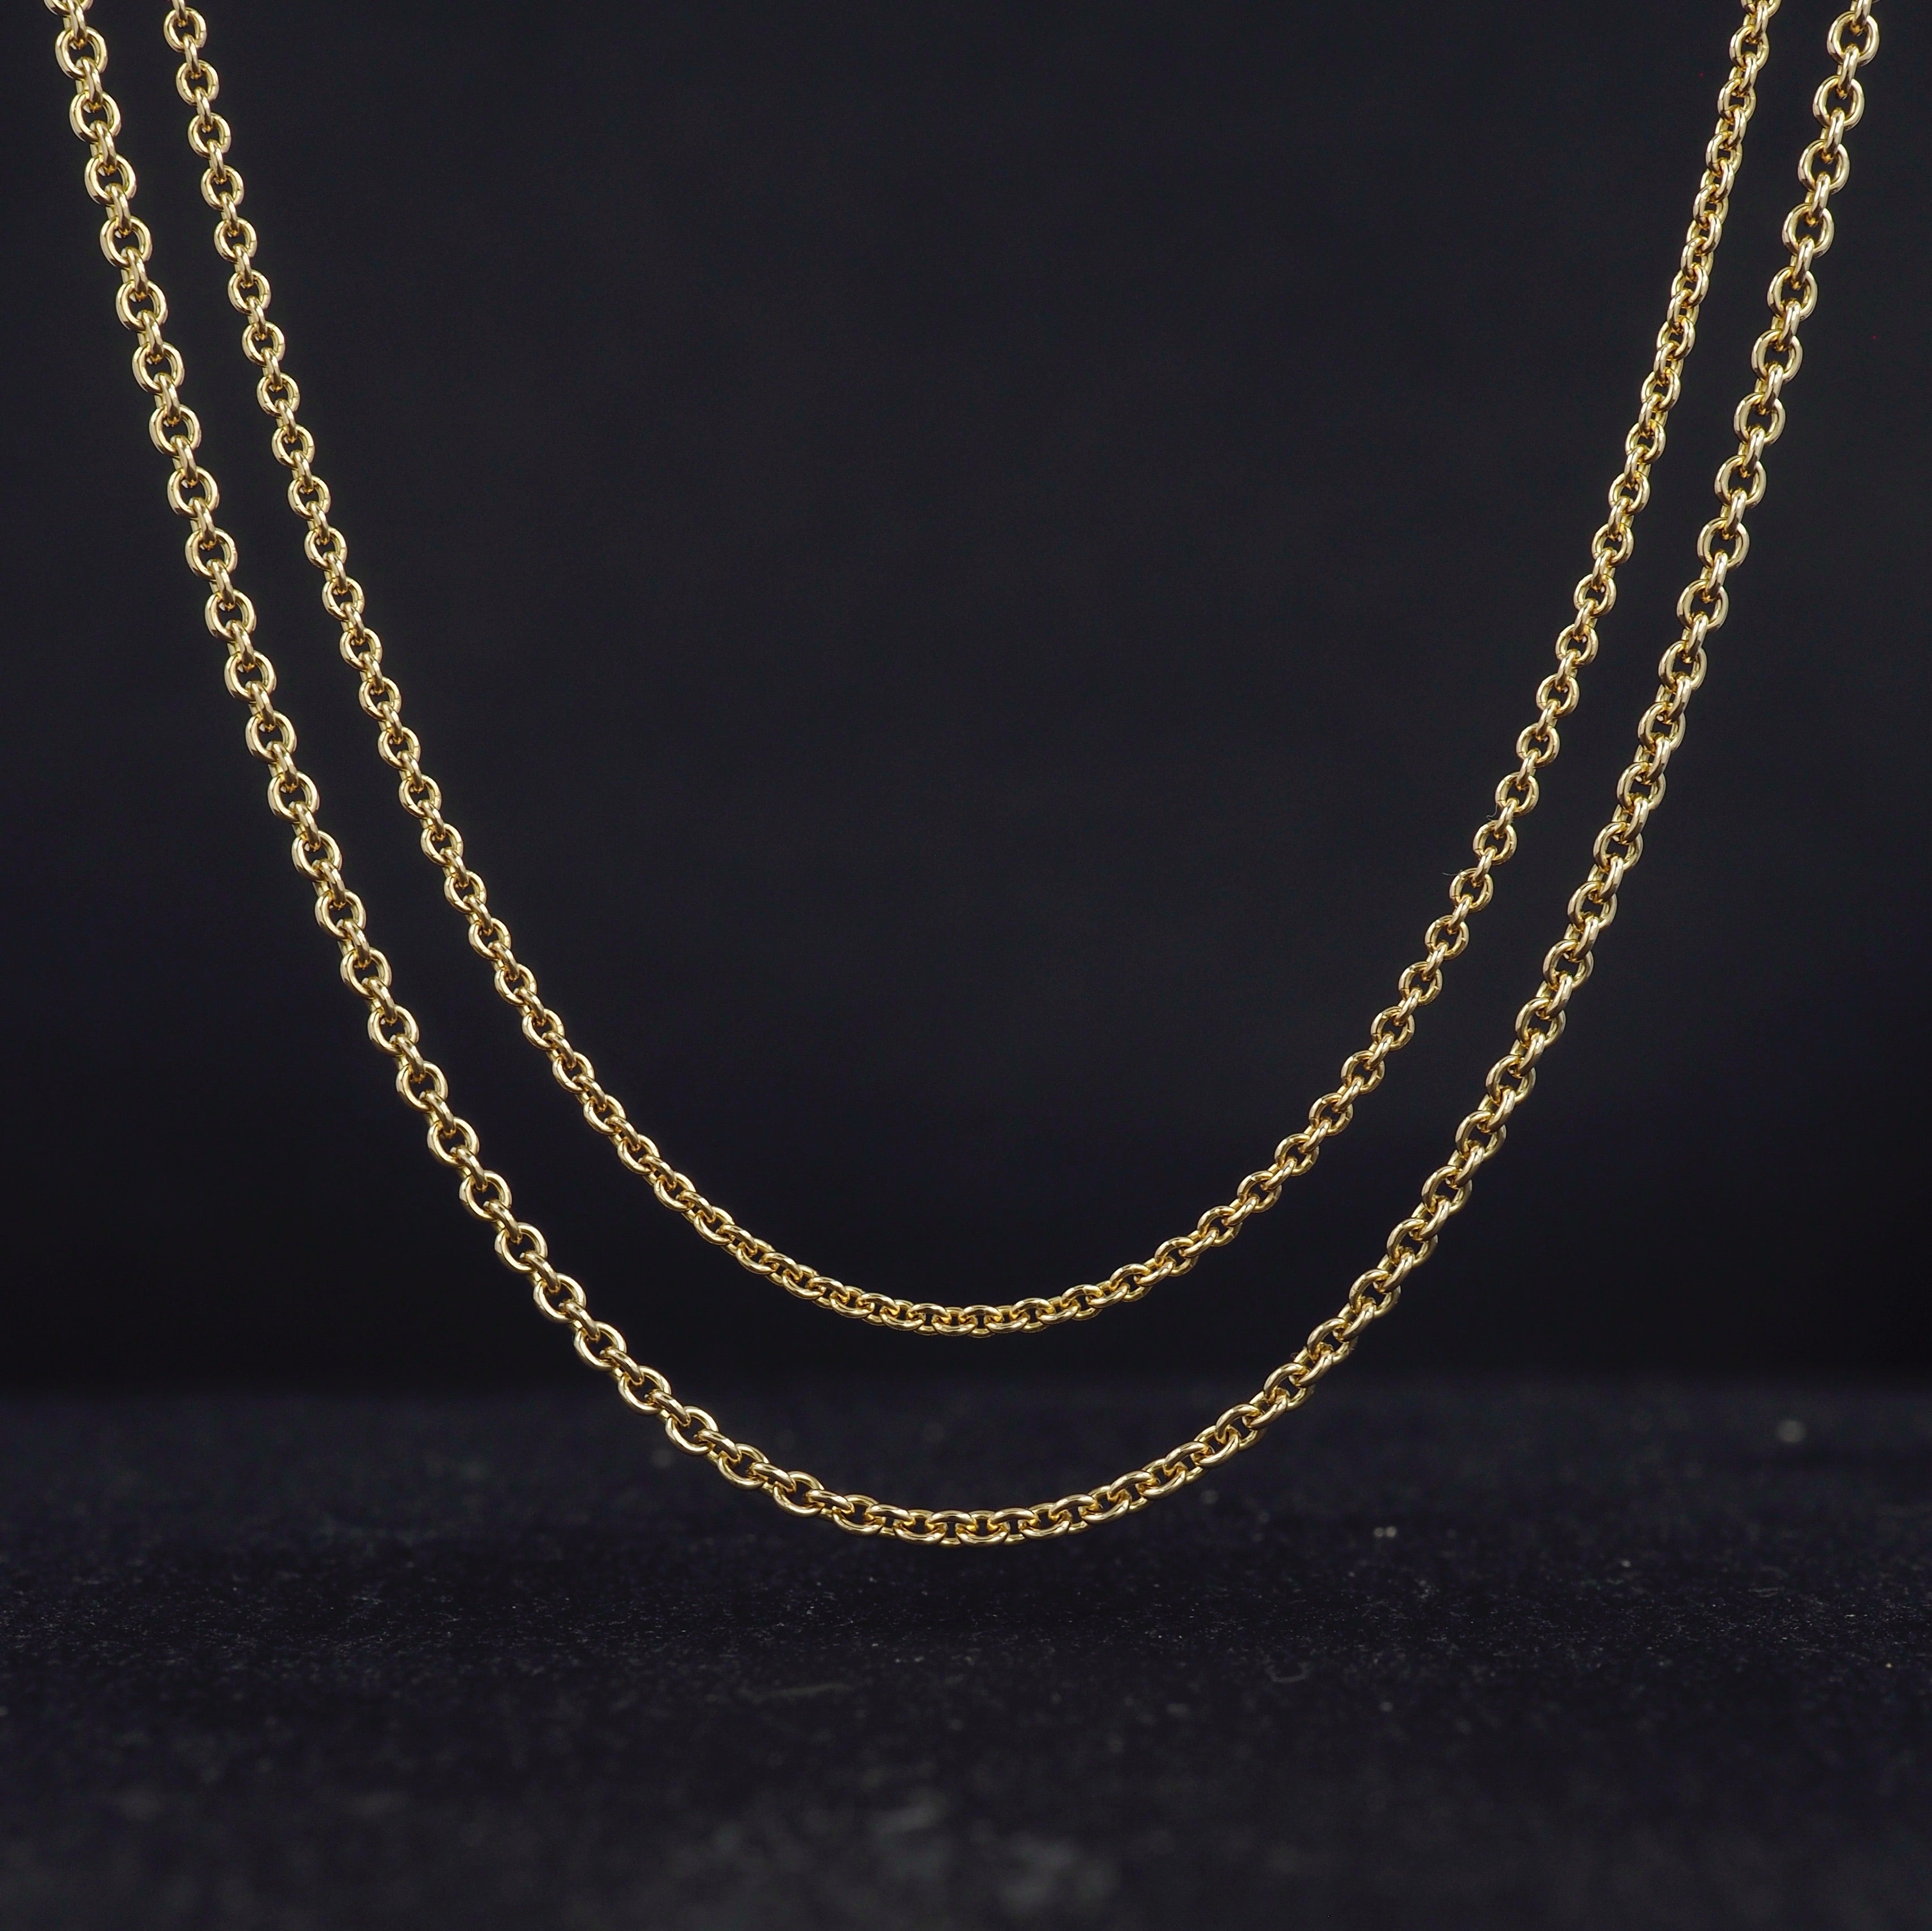 1.6mm gold cable chain